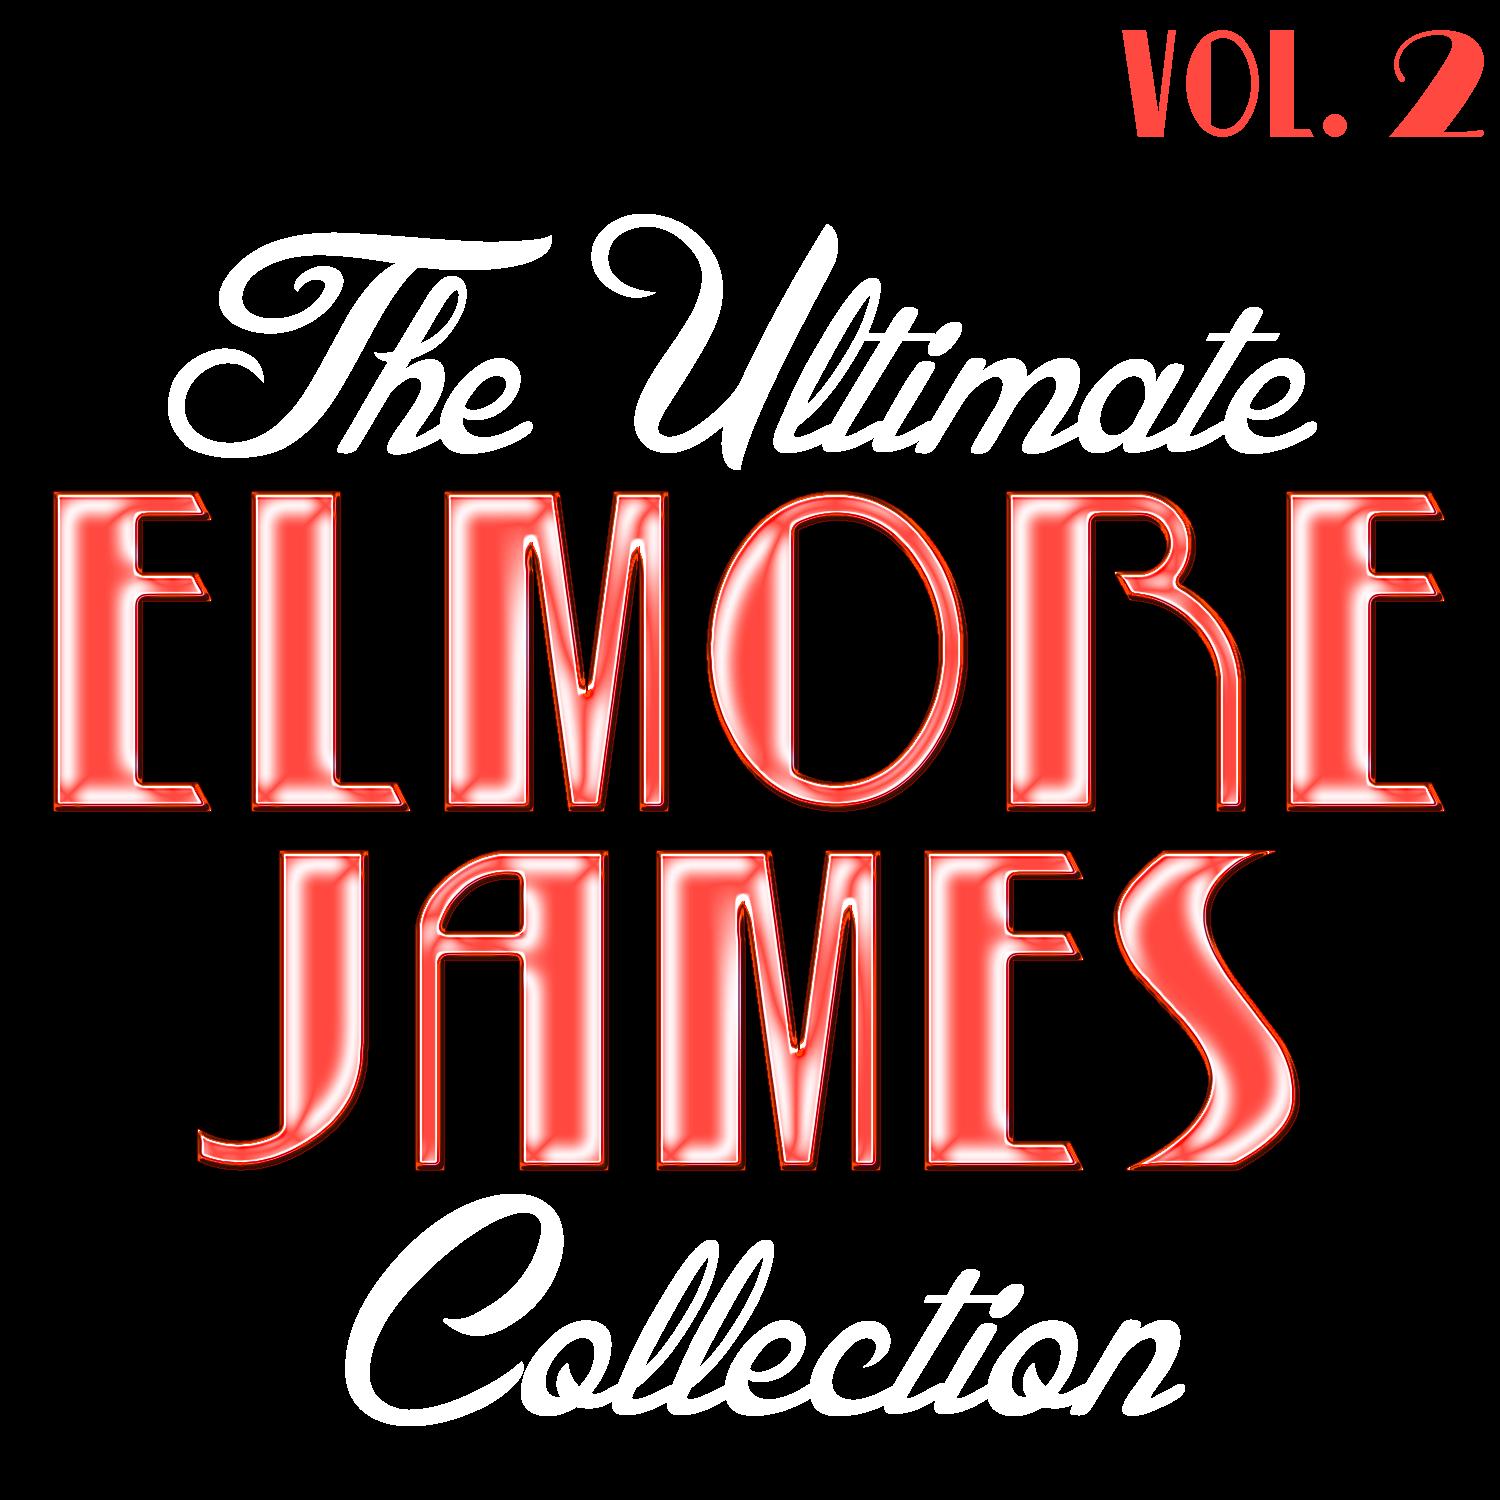 The Ultimate Elmore James Collection Vol. 2